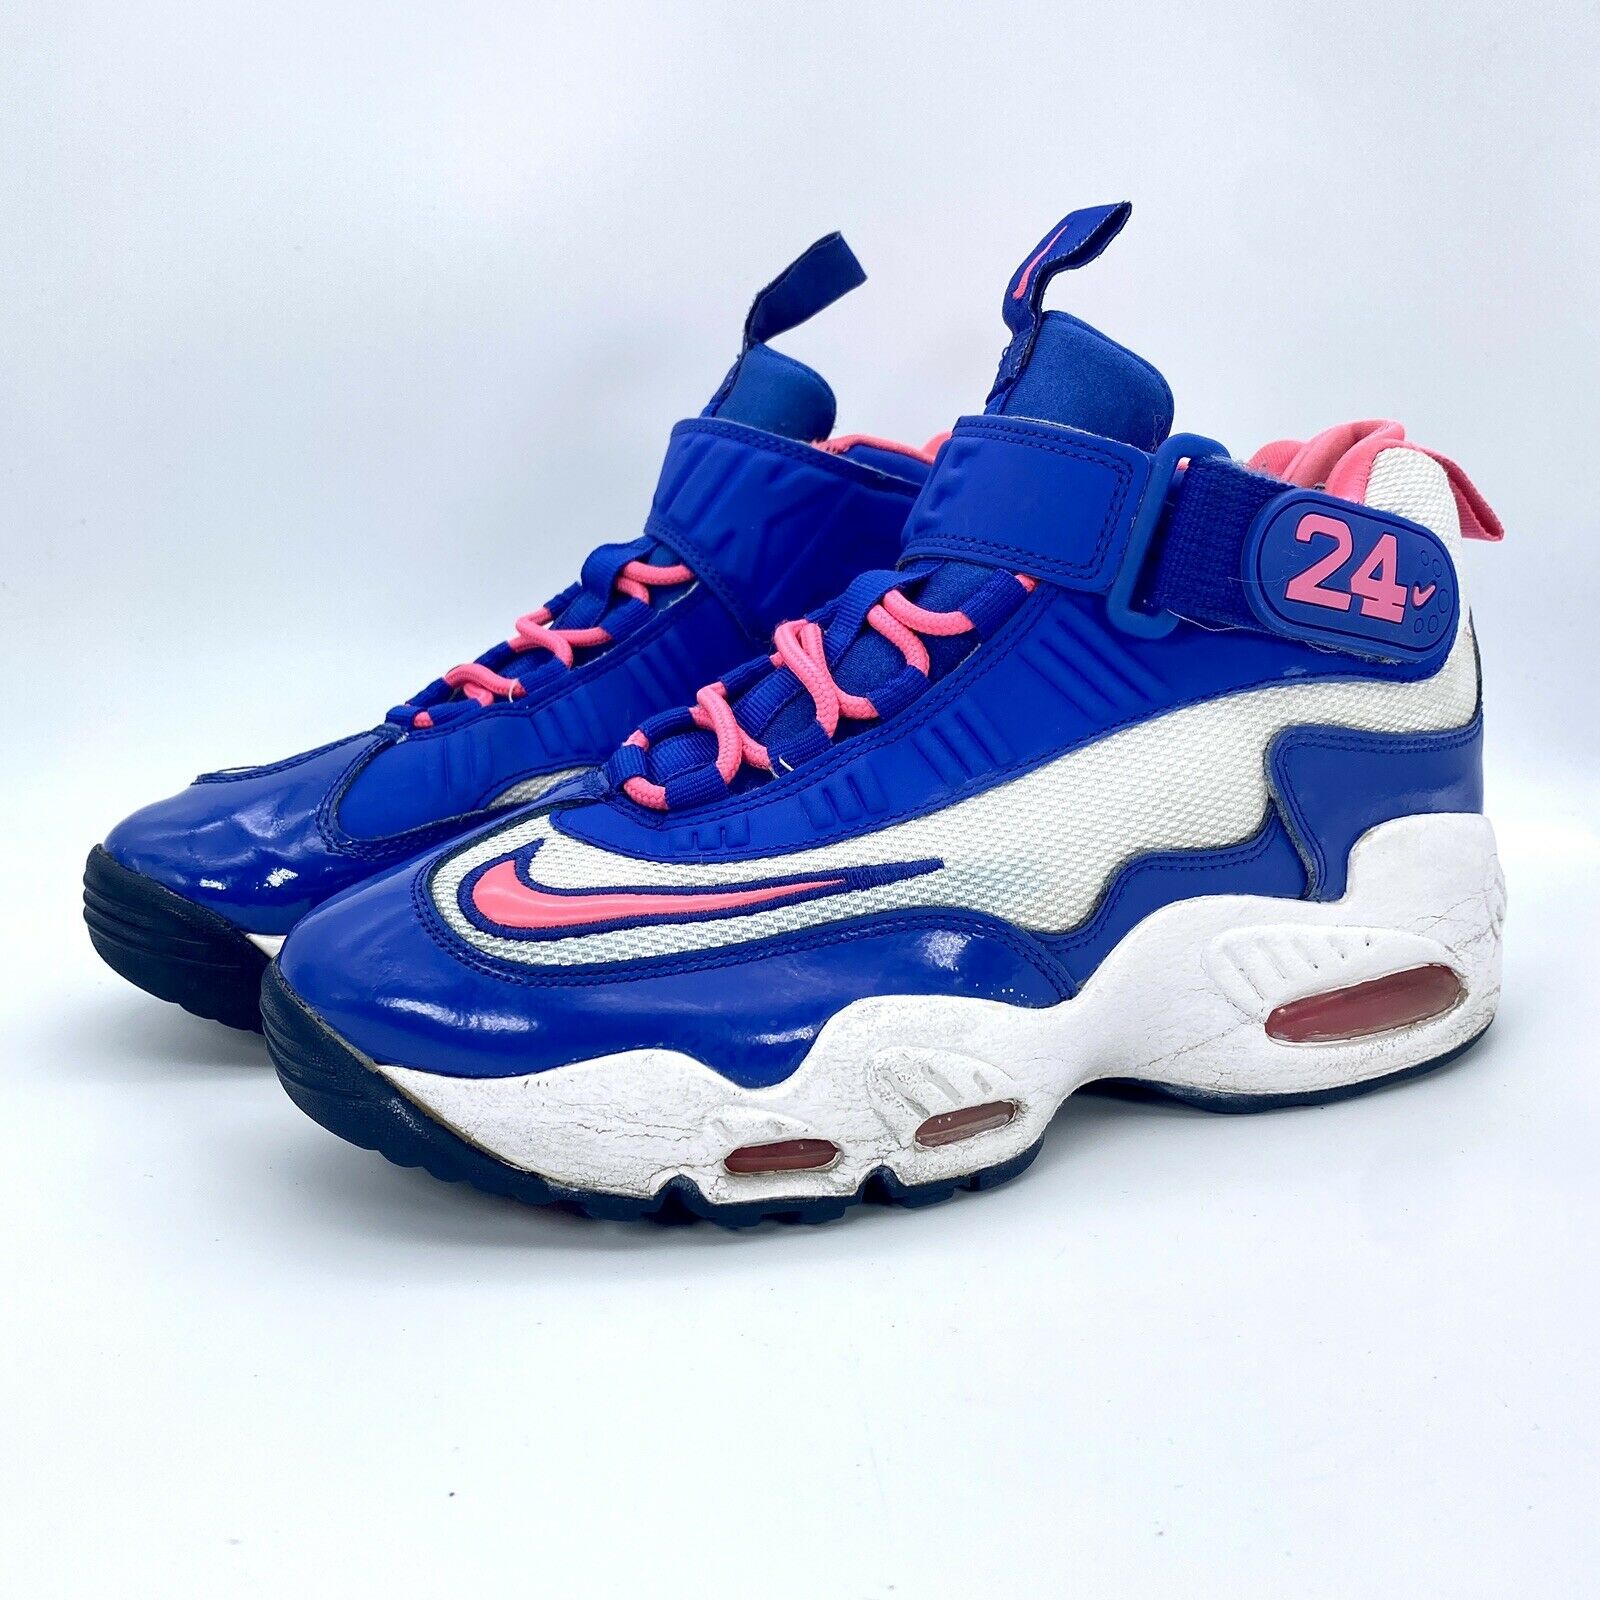 Nike Air Griffey Max 1 Youth 7y/wmn 8.5 552983-100 Rare Colorway Pink Blue White